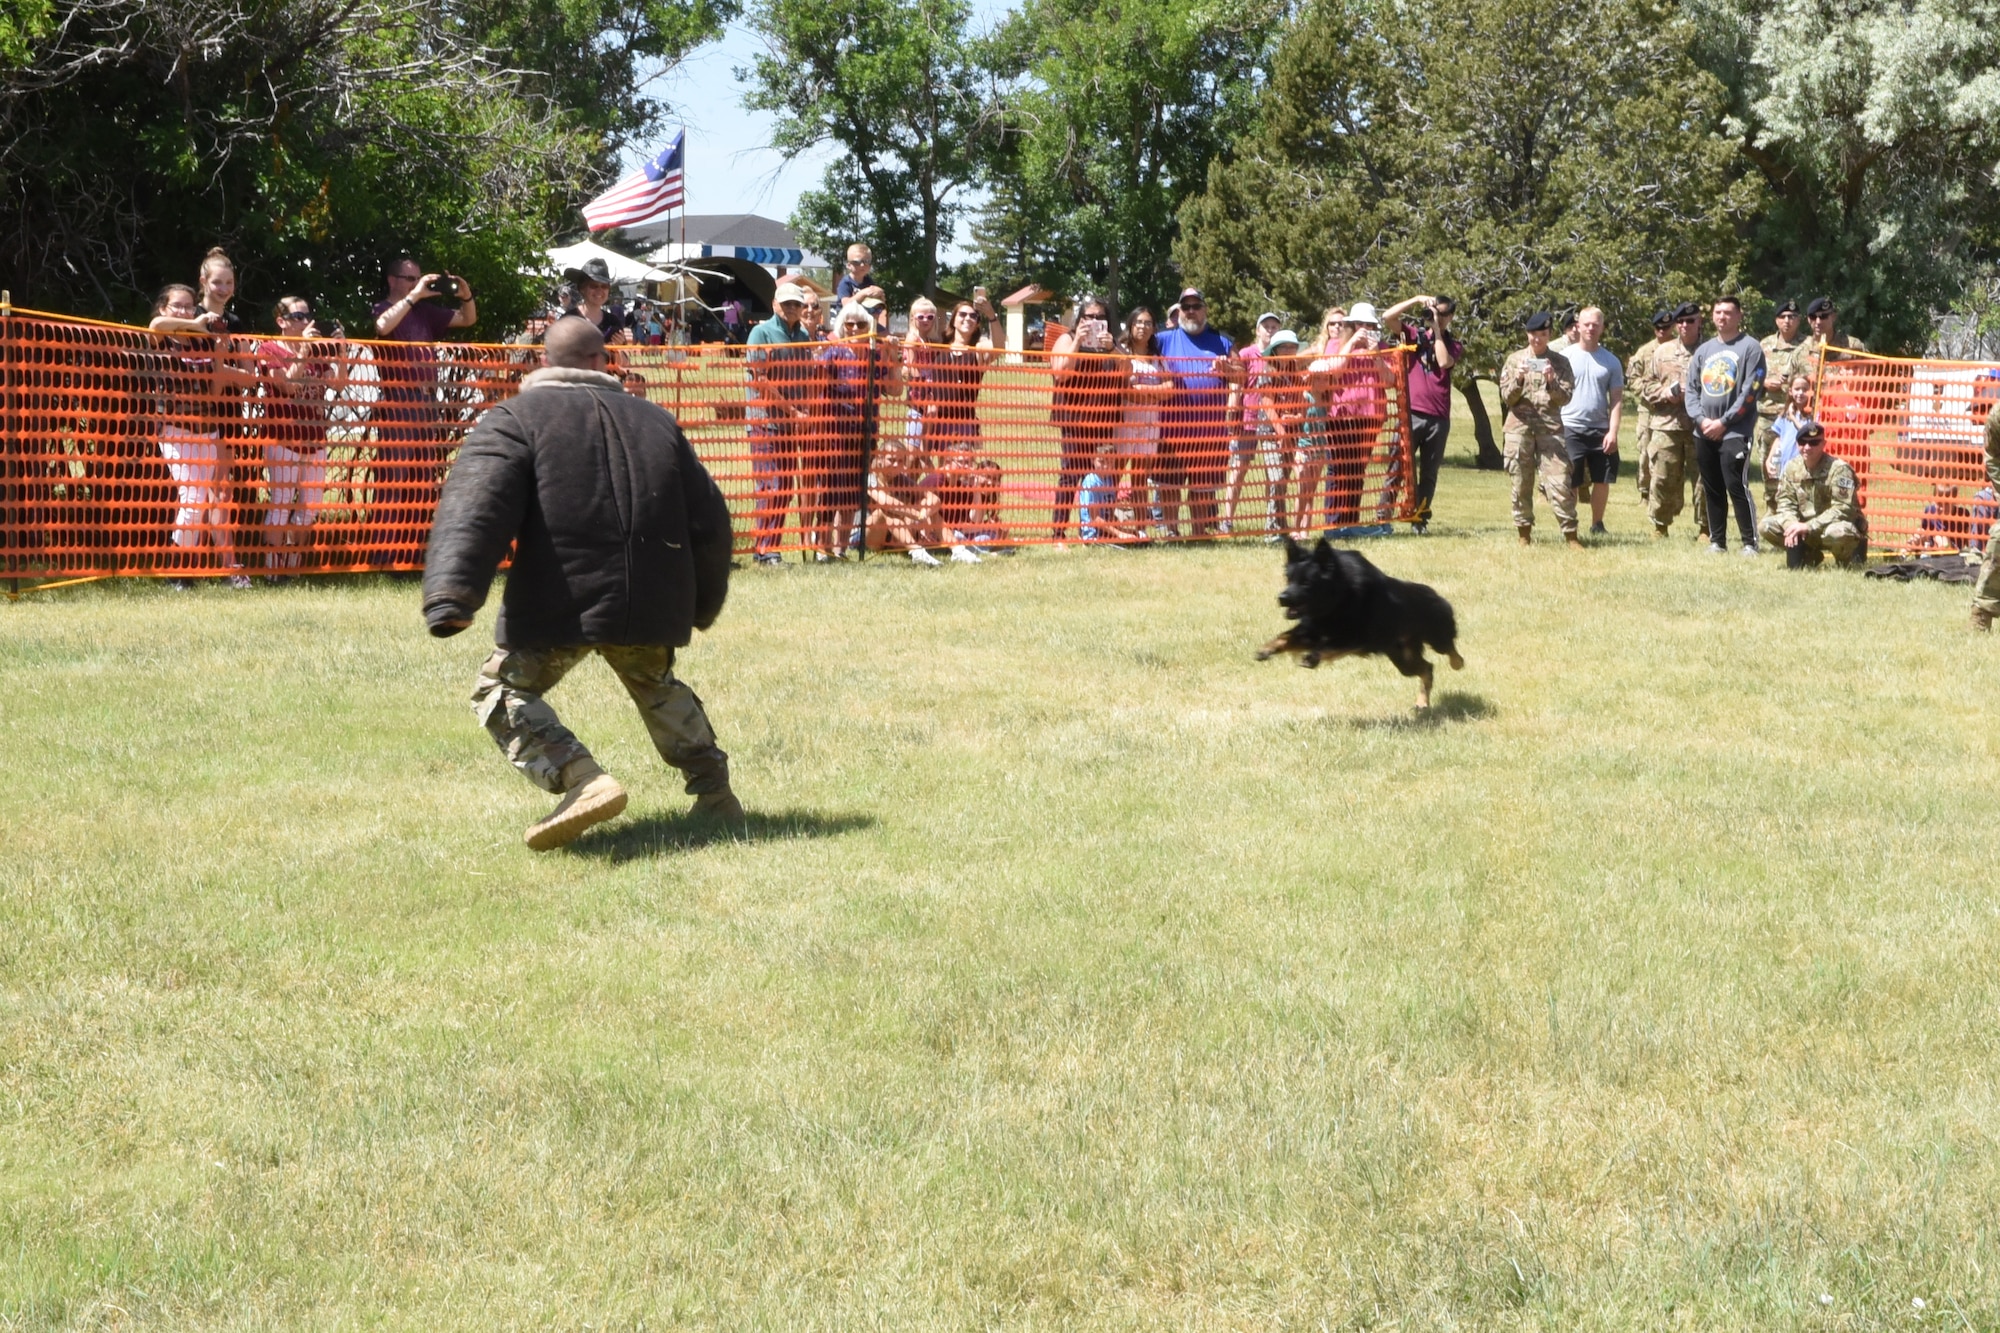 Staff Sgt. Curtis Shannon, 90th Security Forces Squadron military working dog handler, demonstrates Rio’s K-9 capabilities during an exhibition at Fort D.A. Russell Days on F.E. Warren Air Force Base, Wyo., July 19, 2019. (U.S. Air Force photo by Terry Higgins)